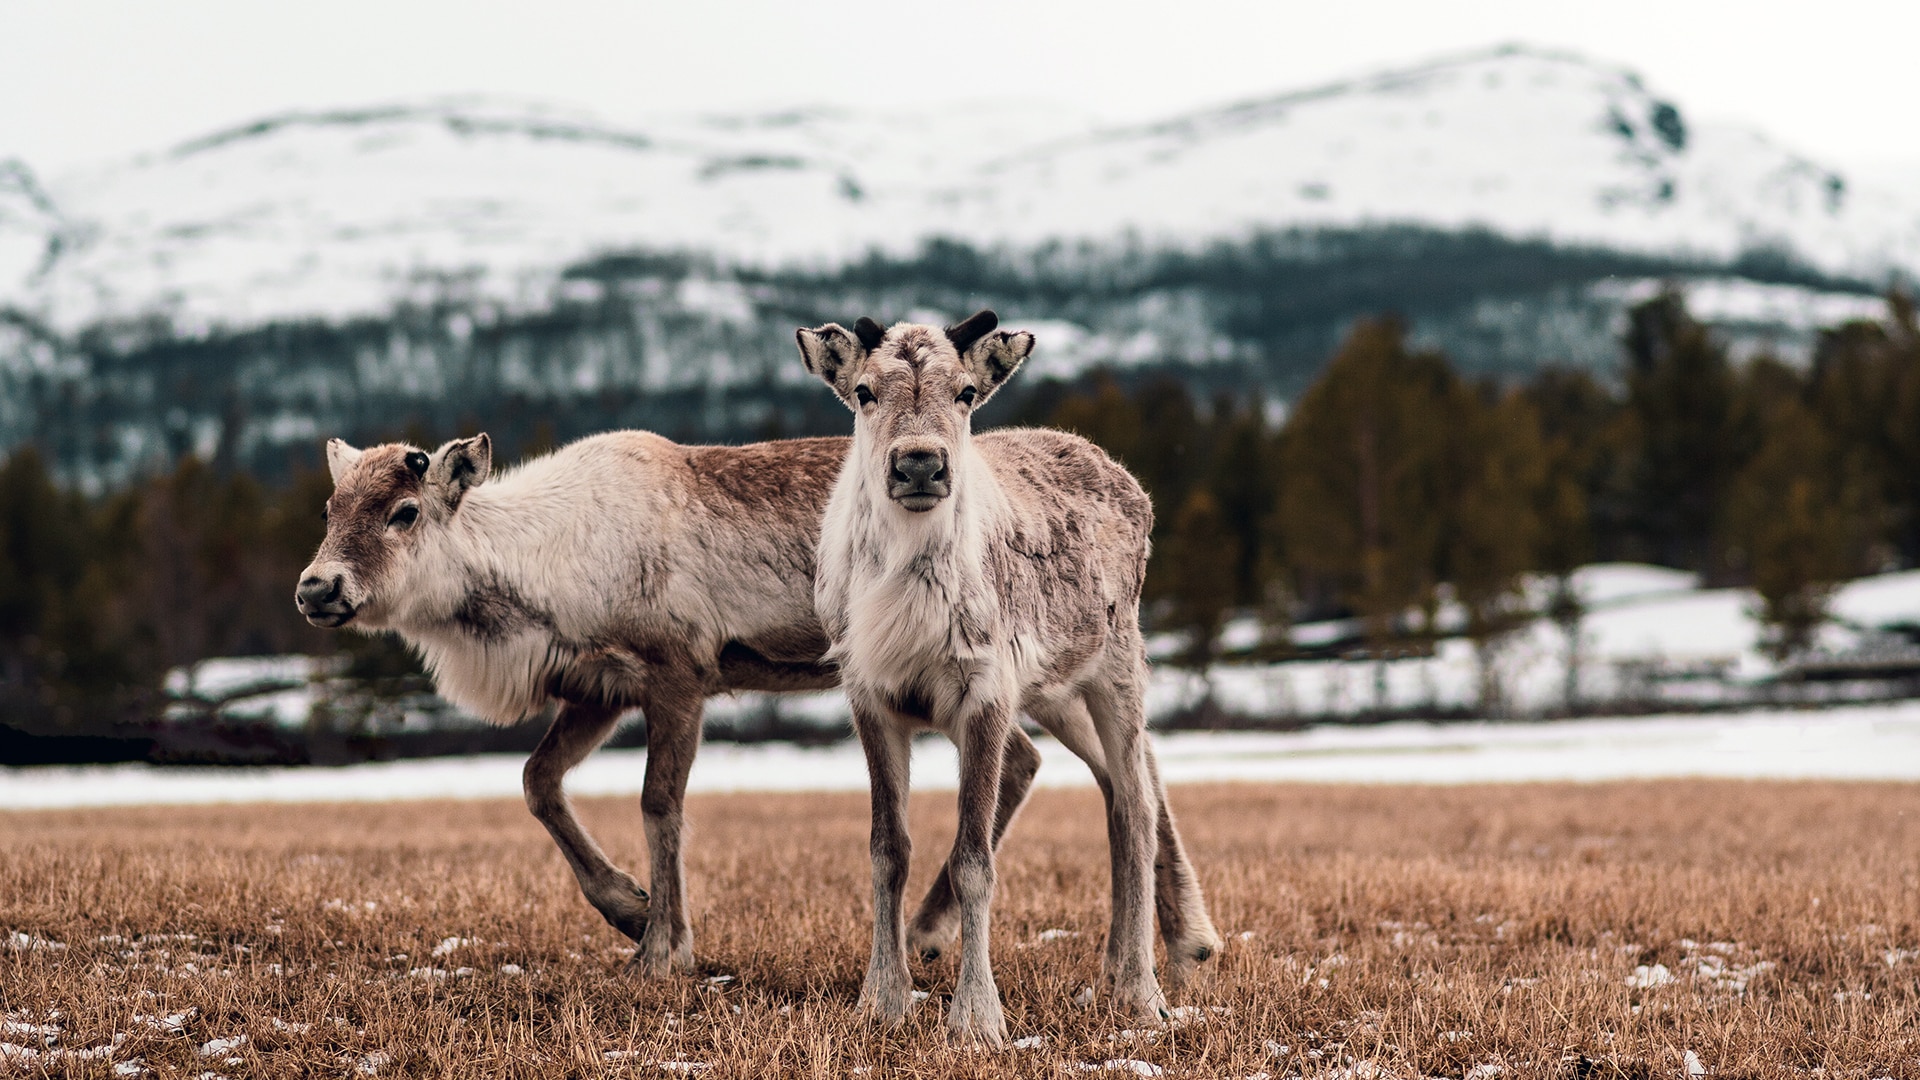 Two reindeer calves on a grass field at winter with snow covered mountains in the distance.